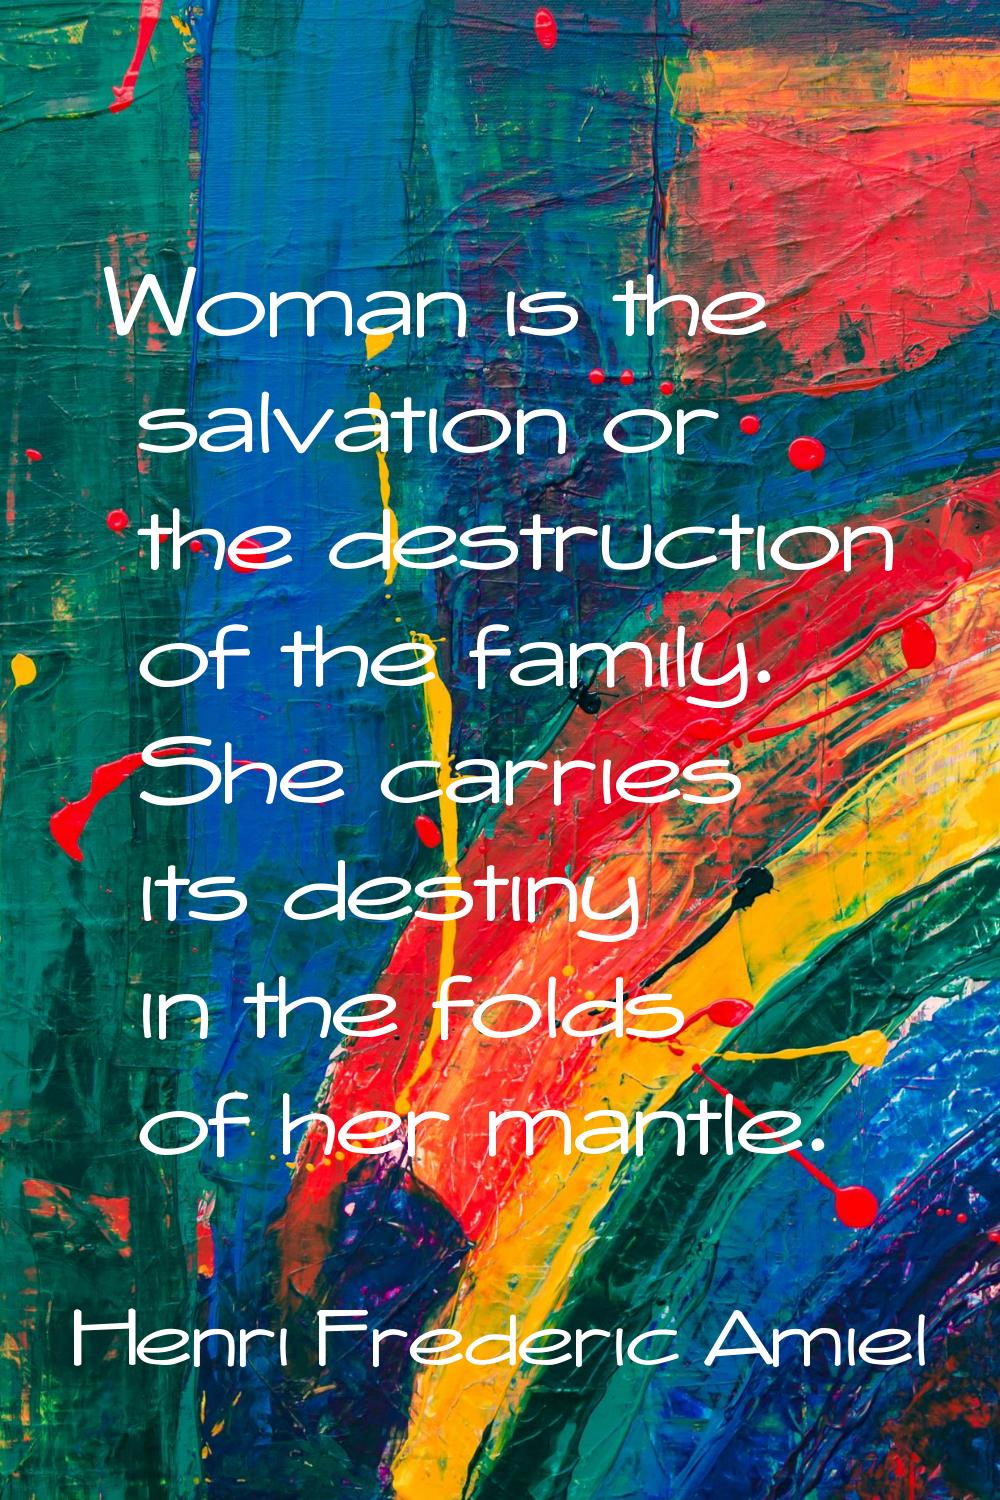 Woman is the salvation or the destruction of the family. She carries its destiny in the folds of he